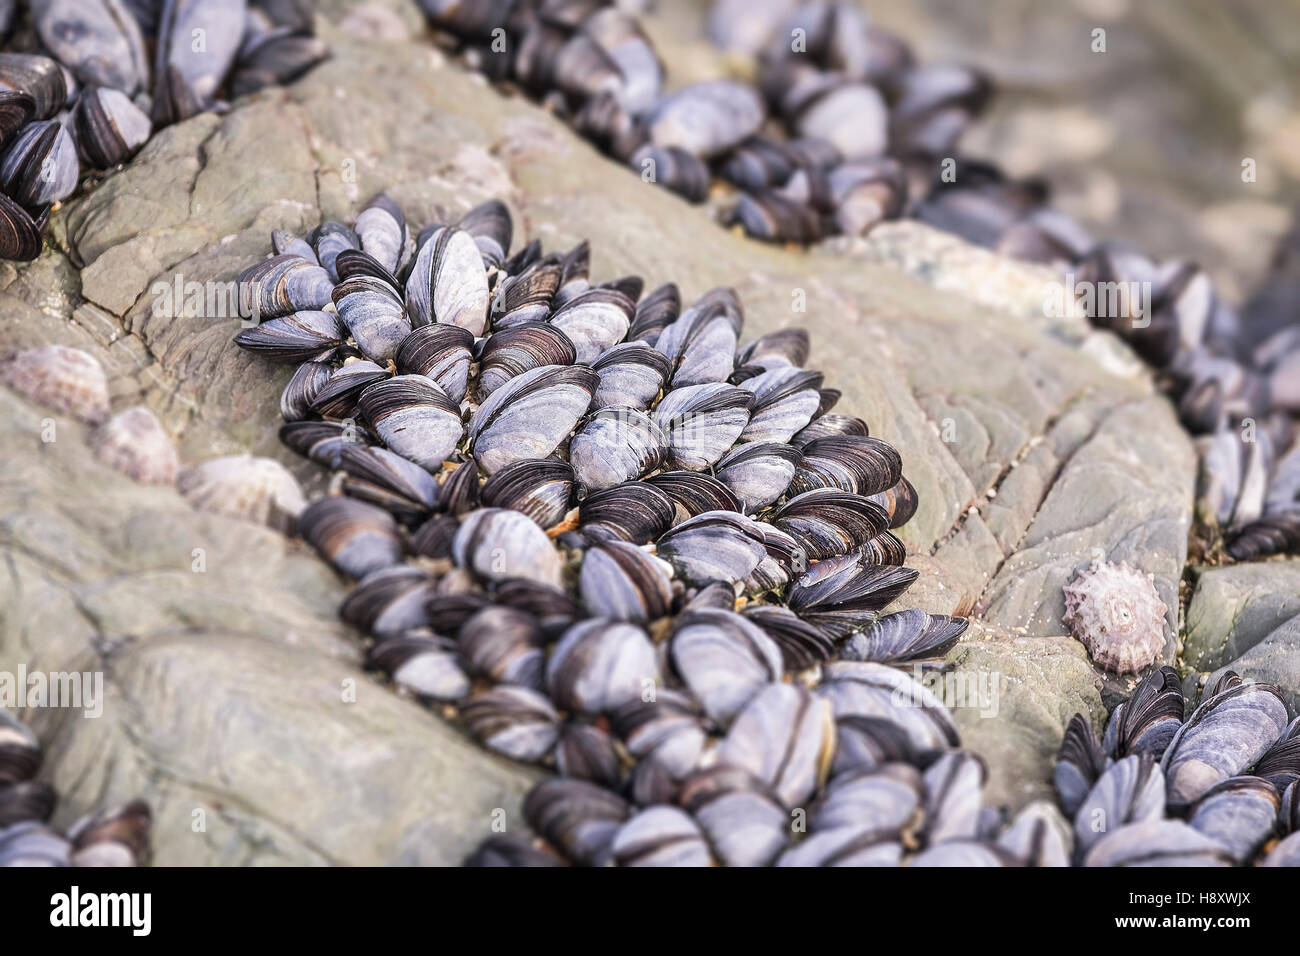 A bed of common mussels. Mytilus edulis. Stock Photo